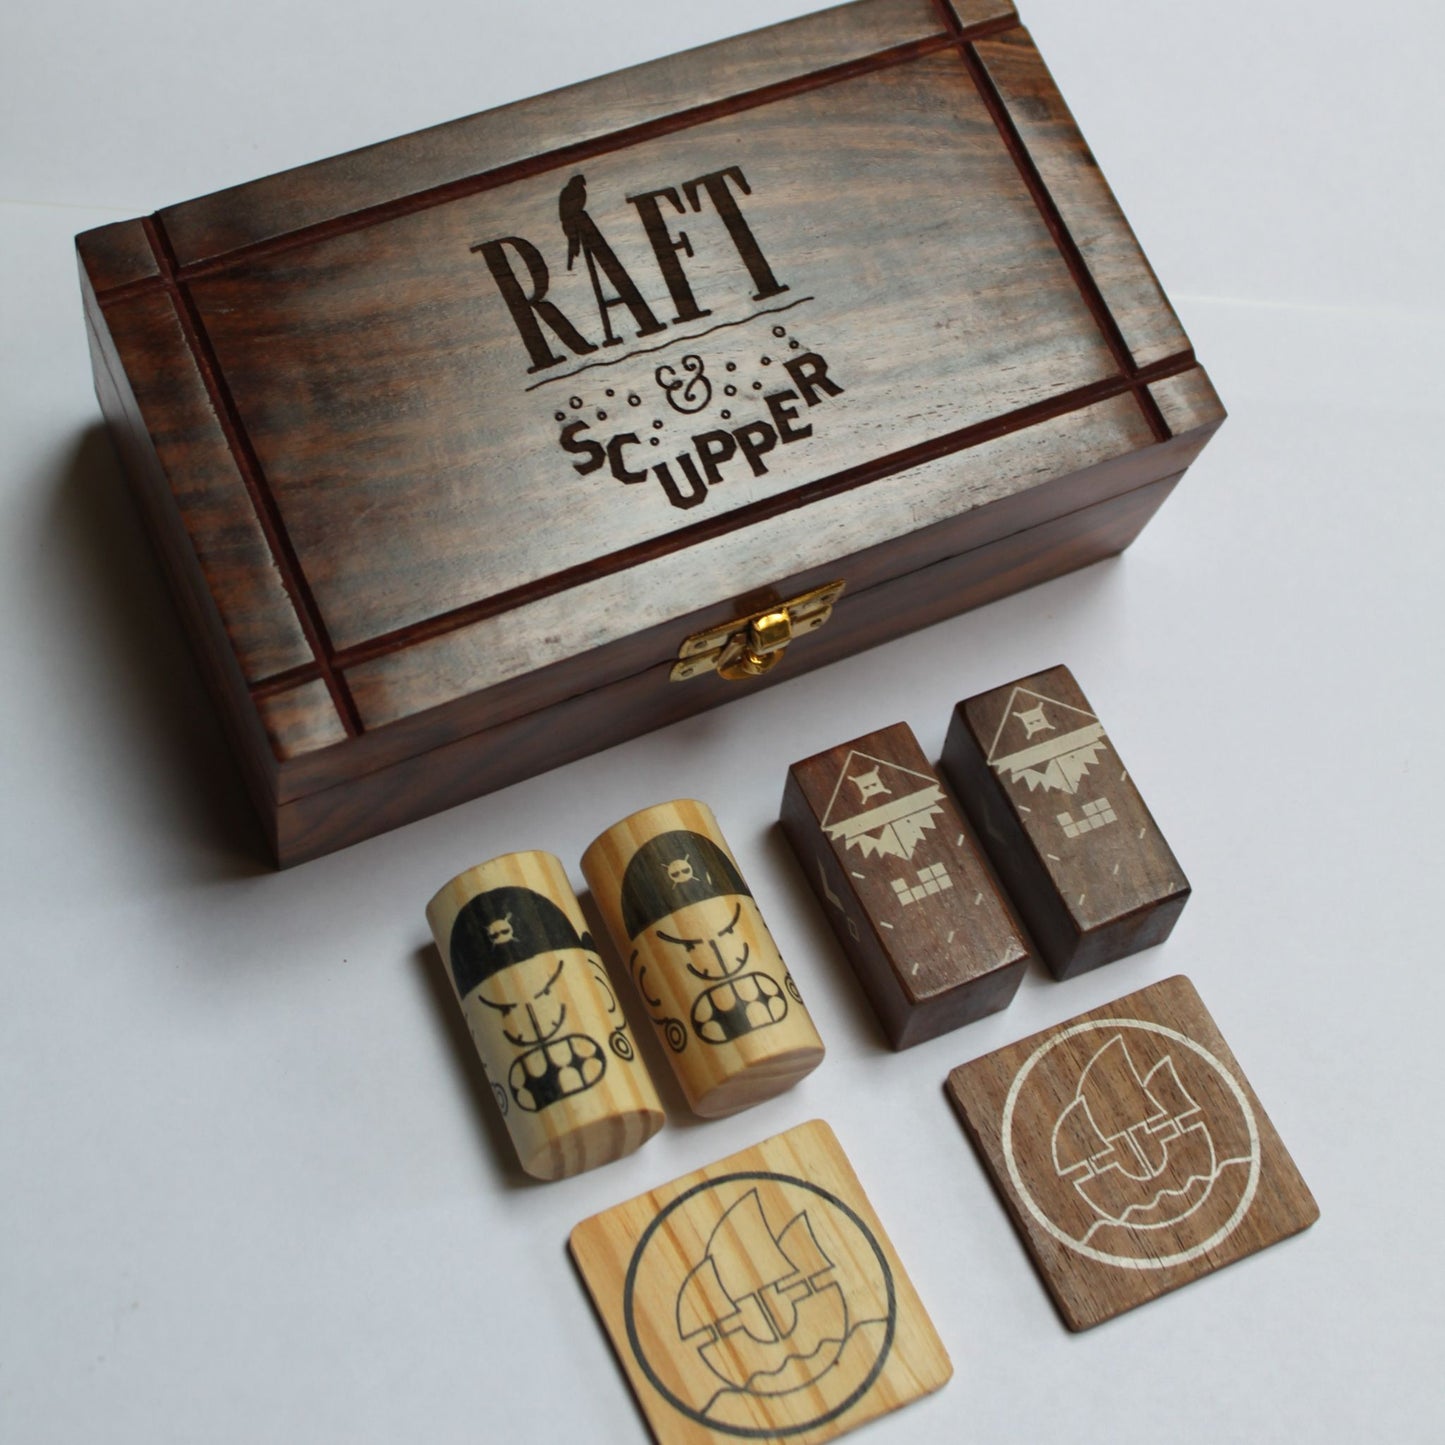 Raft and Scupper handmade wooden game at Good Things-min